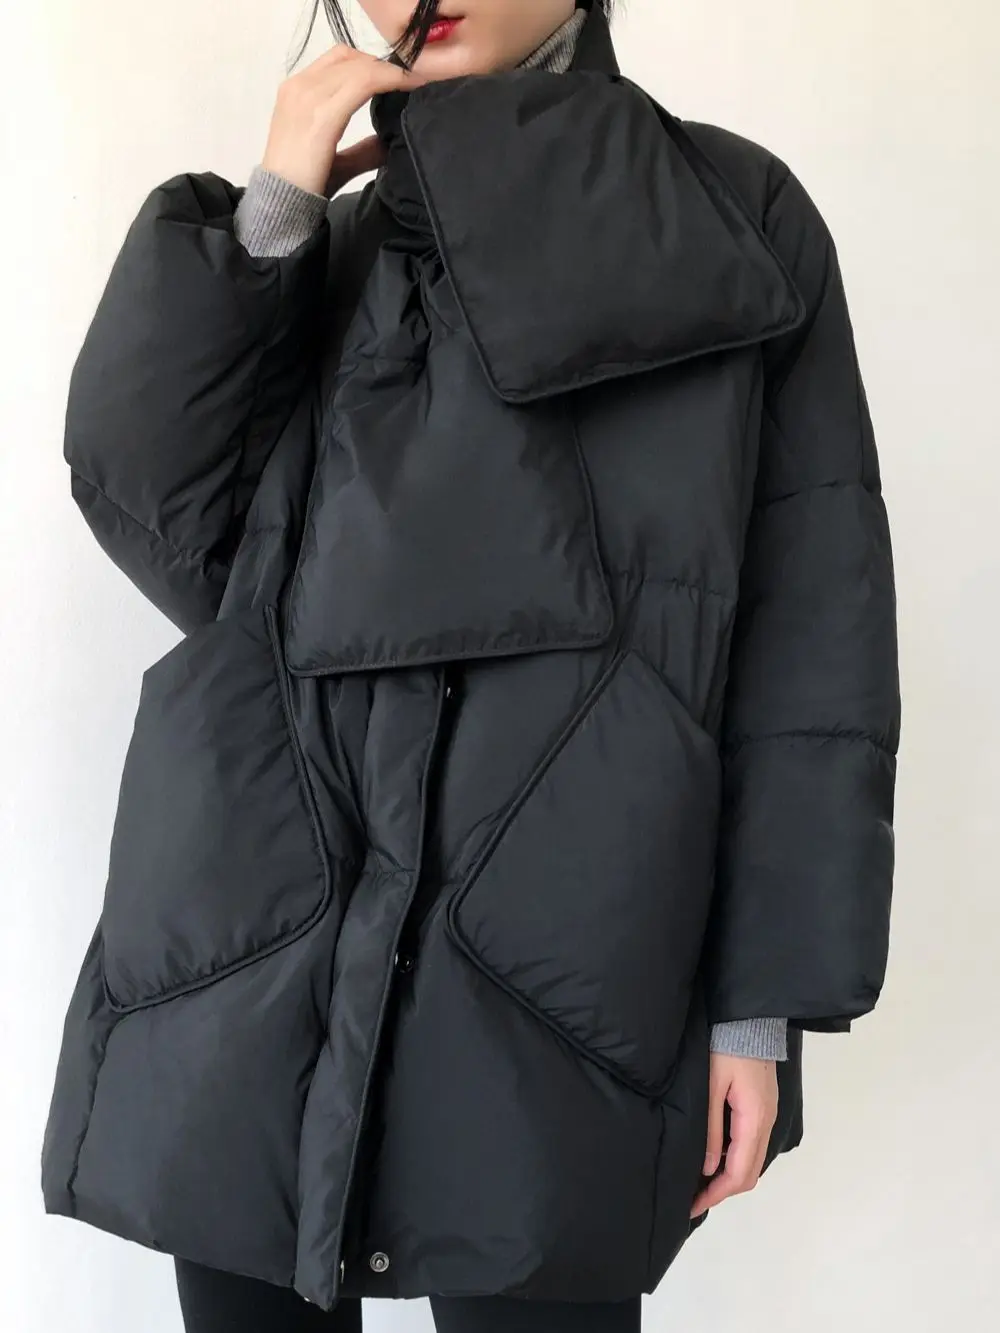 Women Down Jacket New Casual Style White Duck Down Jackets Autumn Winter Coats And Parkas Female Outwear